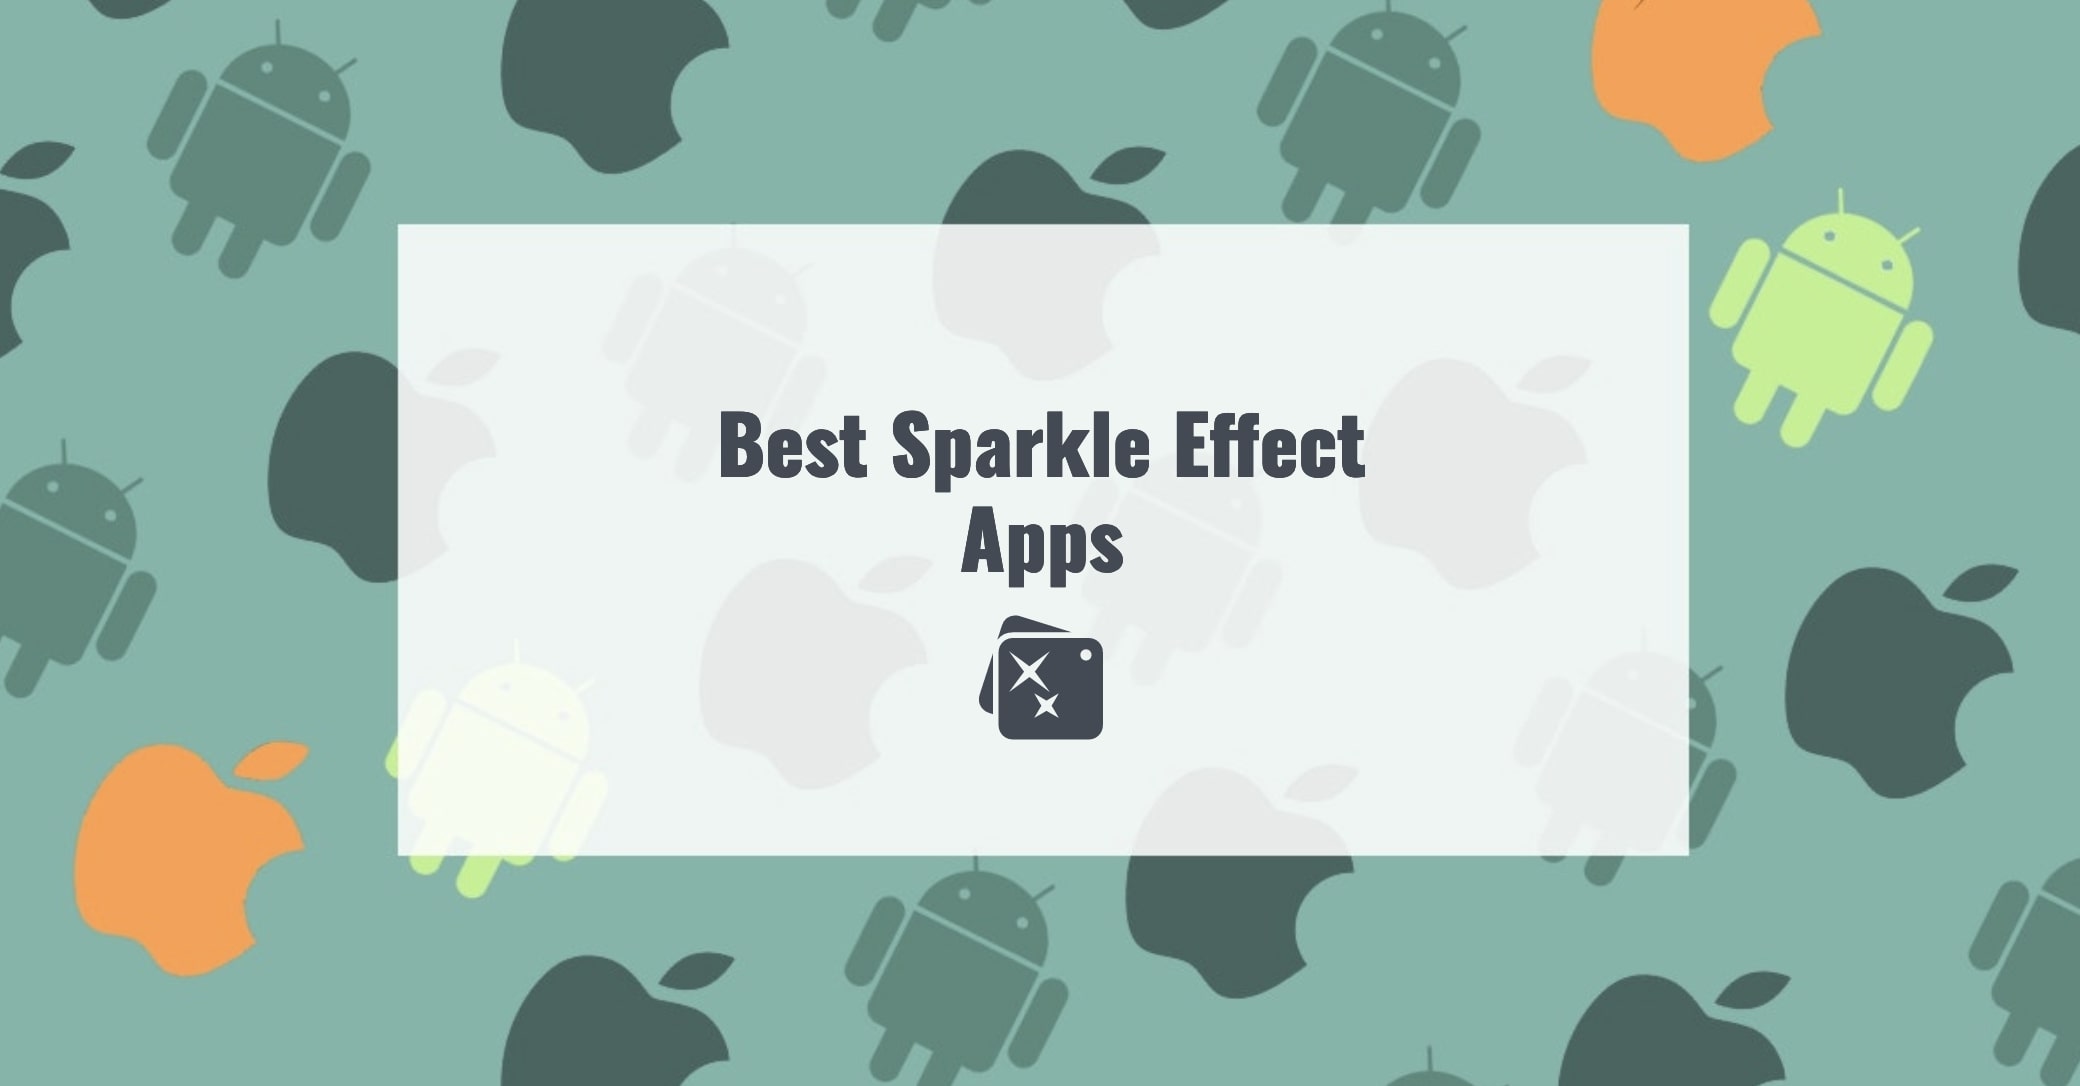 Best Sparkle Effect Apps